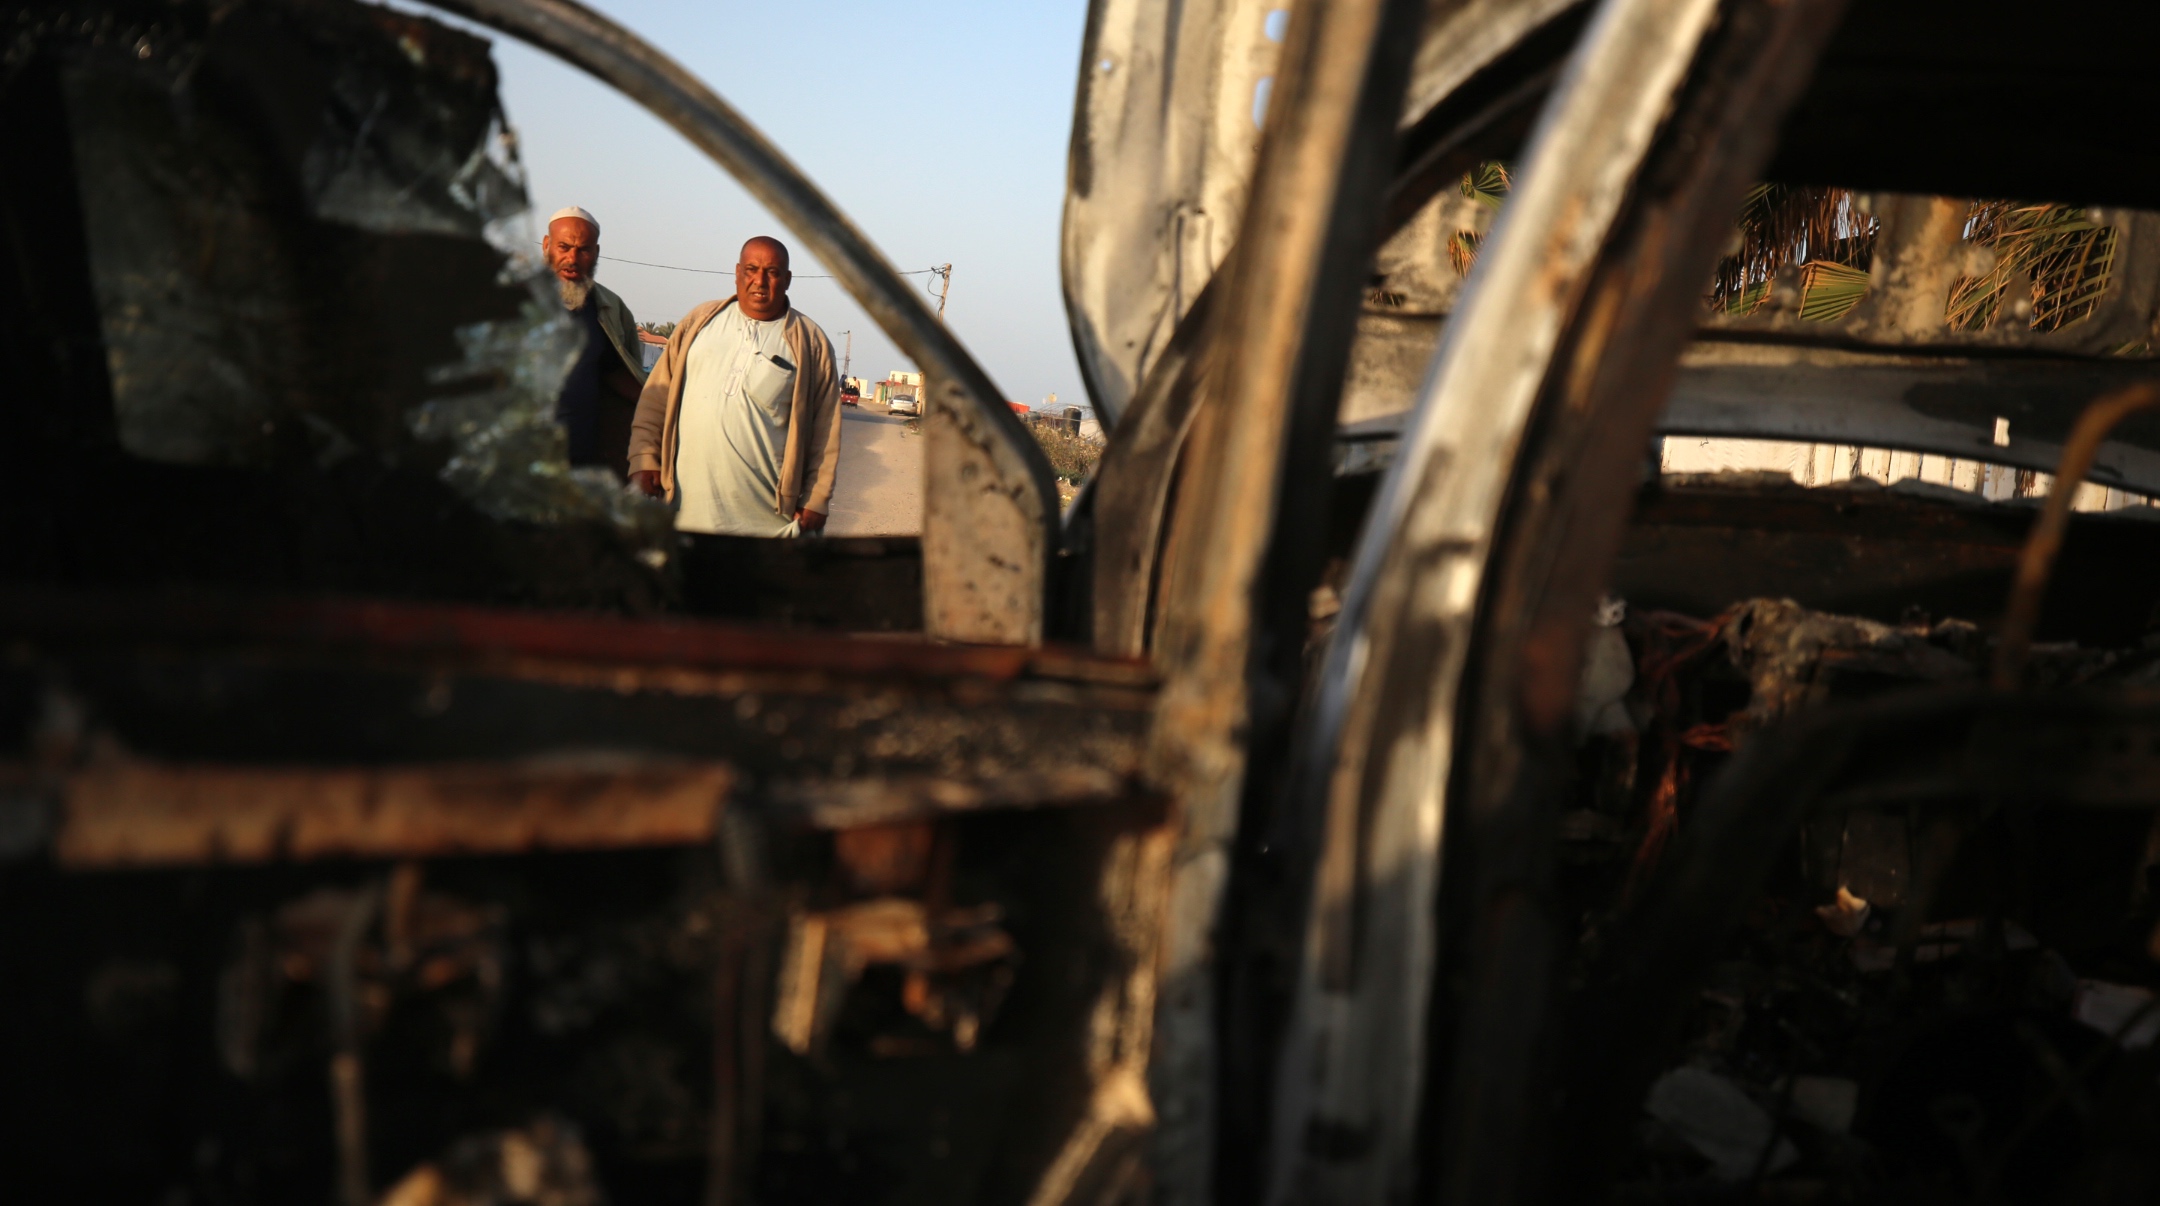 Palestinians stand next to a vehicle, where volunteers from the World Central Kitchen, including foreigners, were killed in an Israeli airstrike, according to the NGO, in Deir Al-Balah, in the central Gaza Strip, April 2, 2024. (Majdi Fathi/NurPhoto/Getty Images)